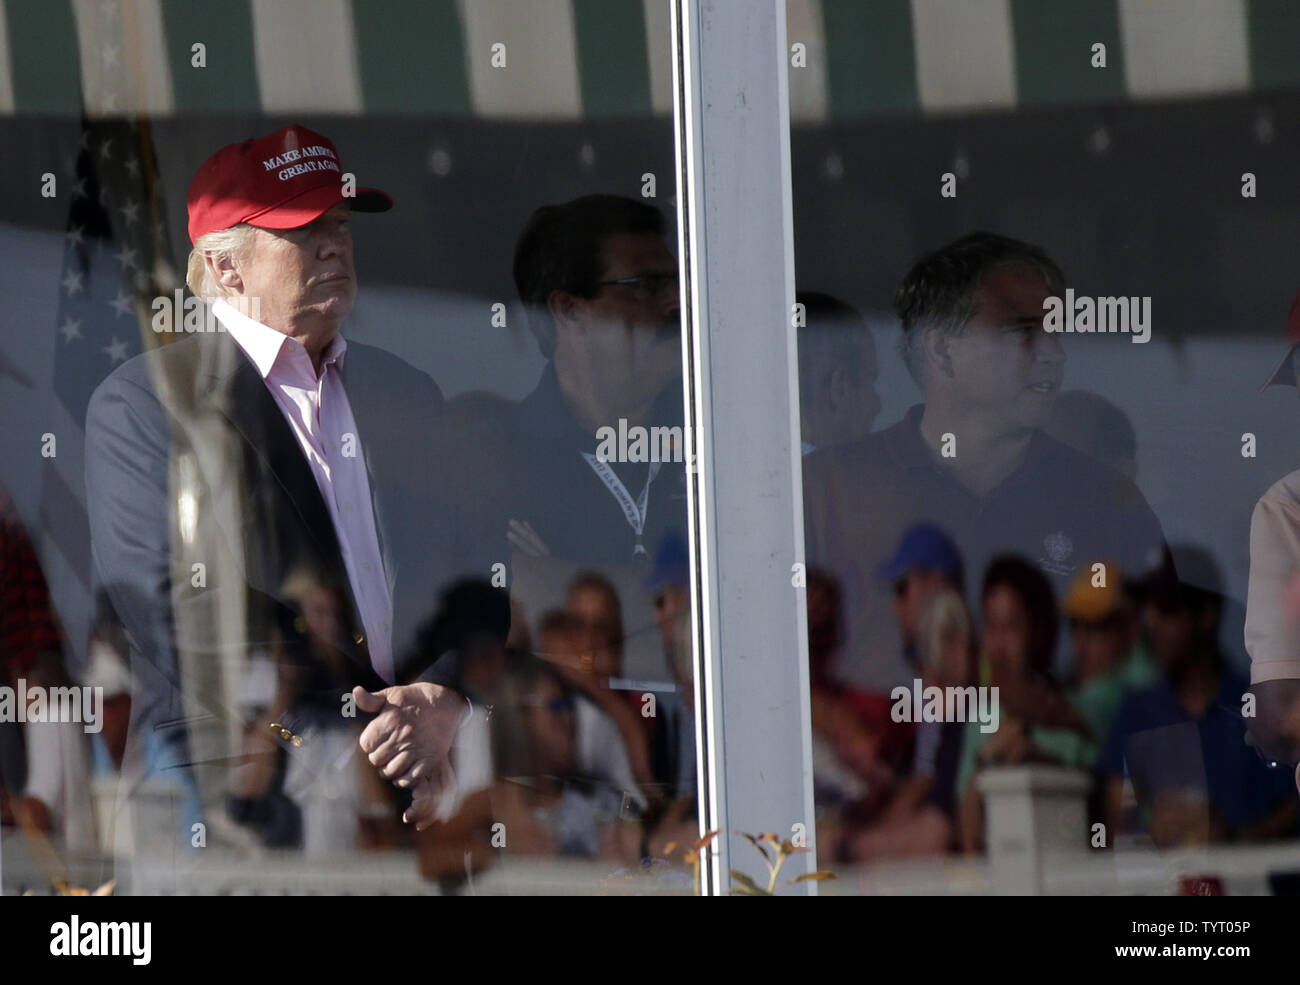 United States President Donald Trump watches the play on the golf course at Trump National Golf Club in the final round of the LPGA U.S. Women's Open Championship  in Bedminster, NJ on July 14, 2017. Park wins her first major with a score of 11 under par.      Photo by John Angelillo/UPI Stock Photo